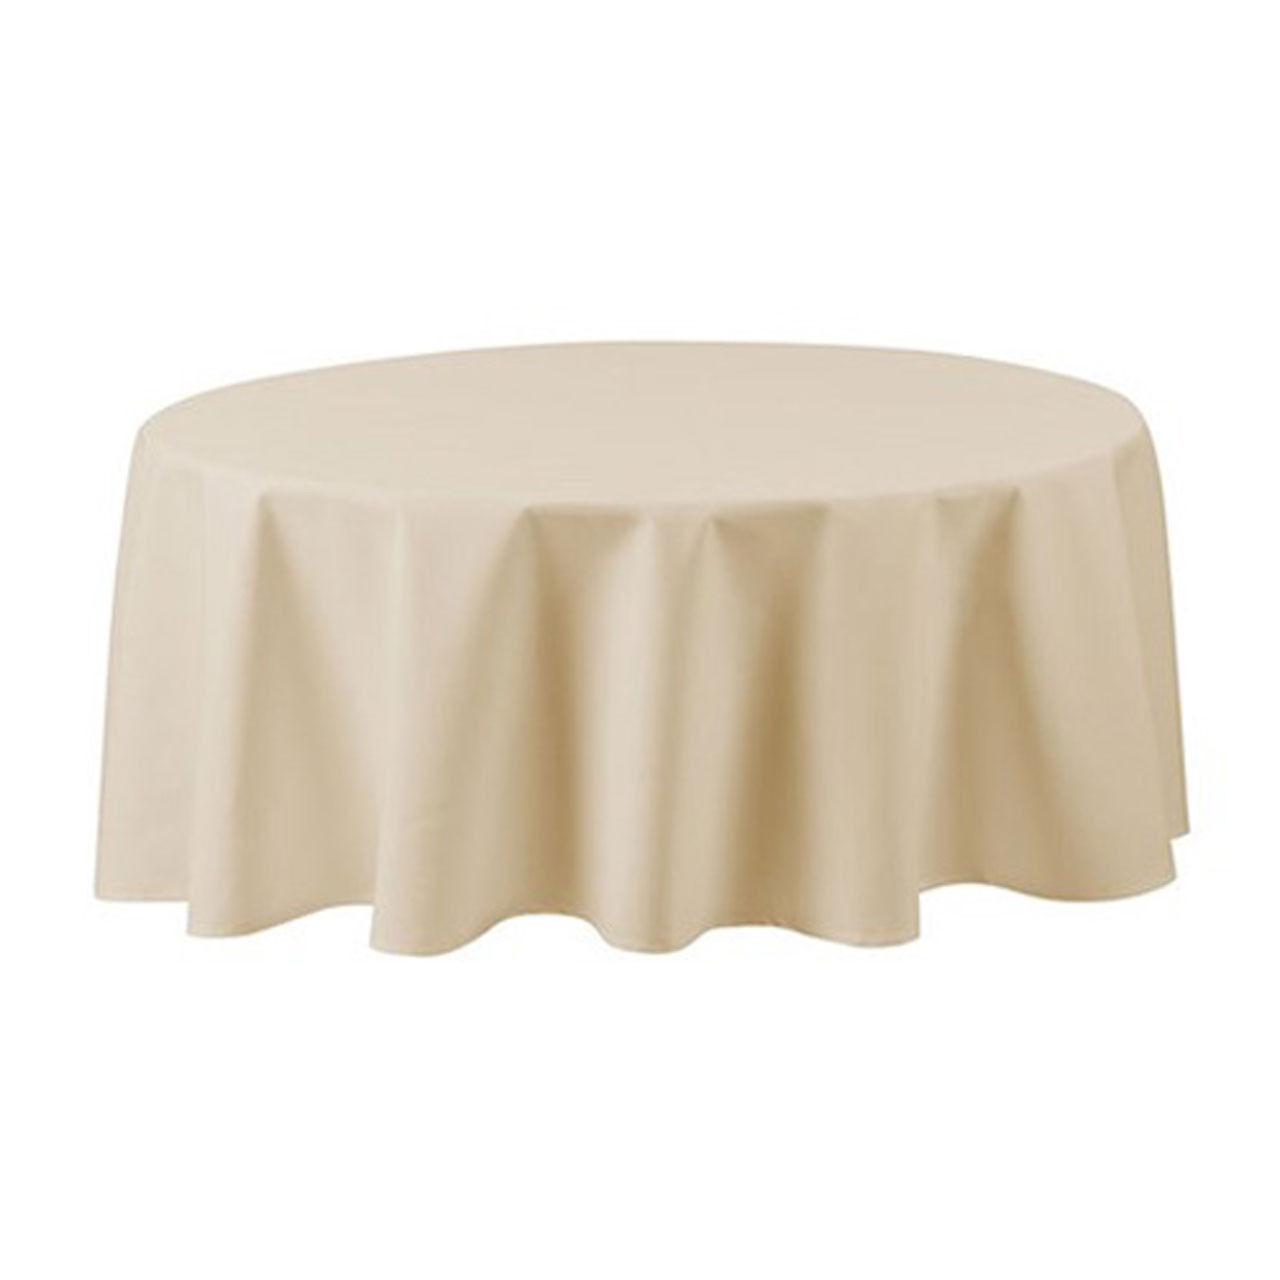 Is the 120'' round ivory tablecloth wholesale in color?